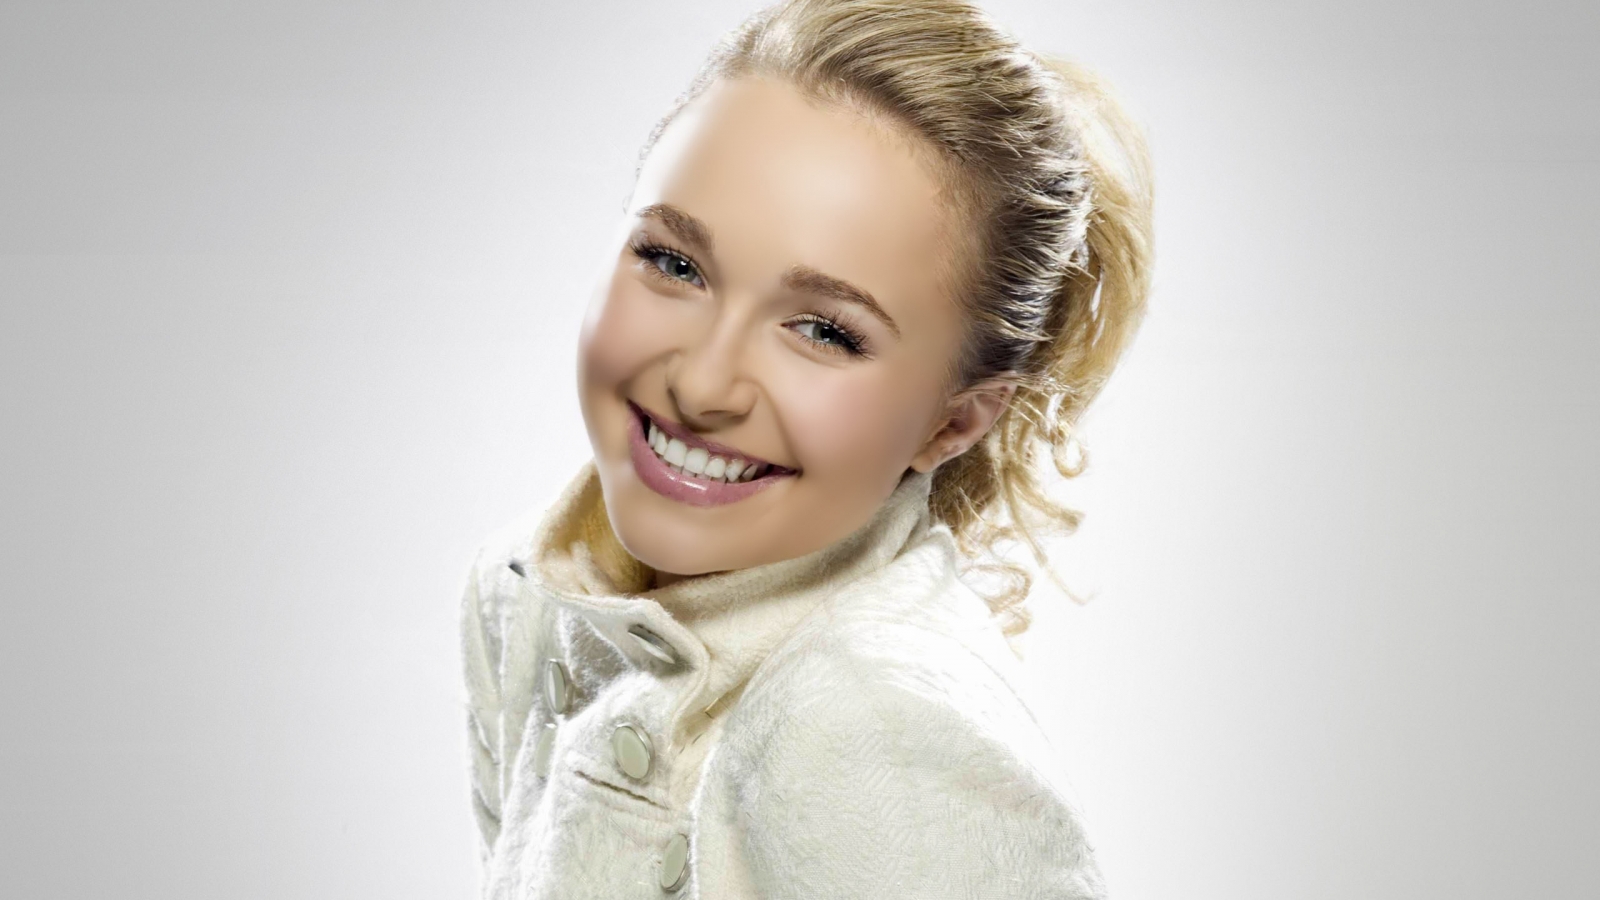 Hayden Panettiere Cute Smile for 1600 x 900 HDTV resolution